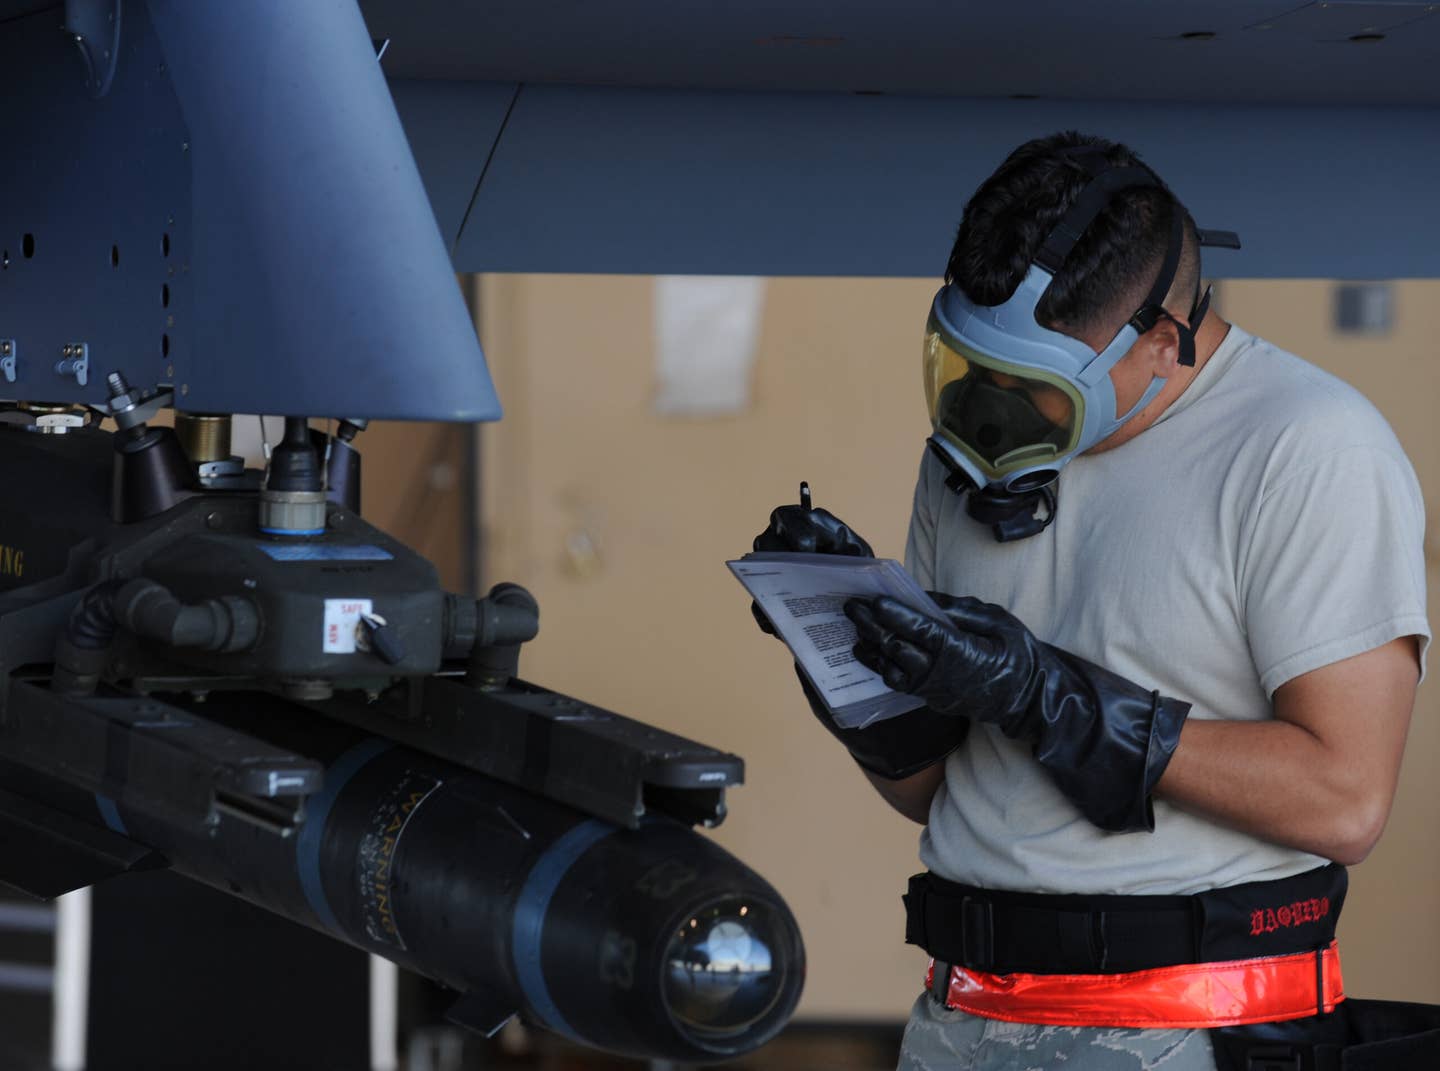 Staff Sgt. Bobby Domanski double checks a guided bomb unit-12 Paveway II laser-guided bomb onto the munitions rack during weapons load training April 22 at Creech Air Force Base, Nev. <em>Credit: U.S. Air Force photo/Senior Airman Nadine Y. Barclay</em>